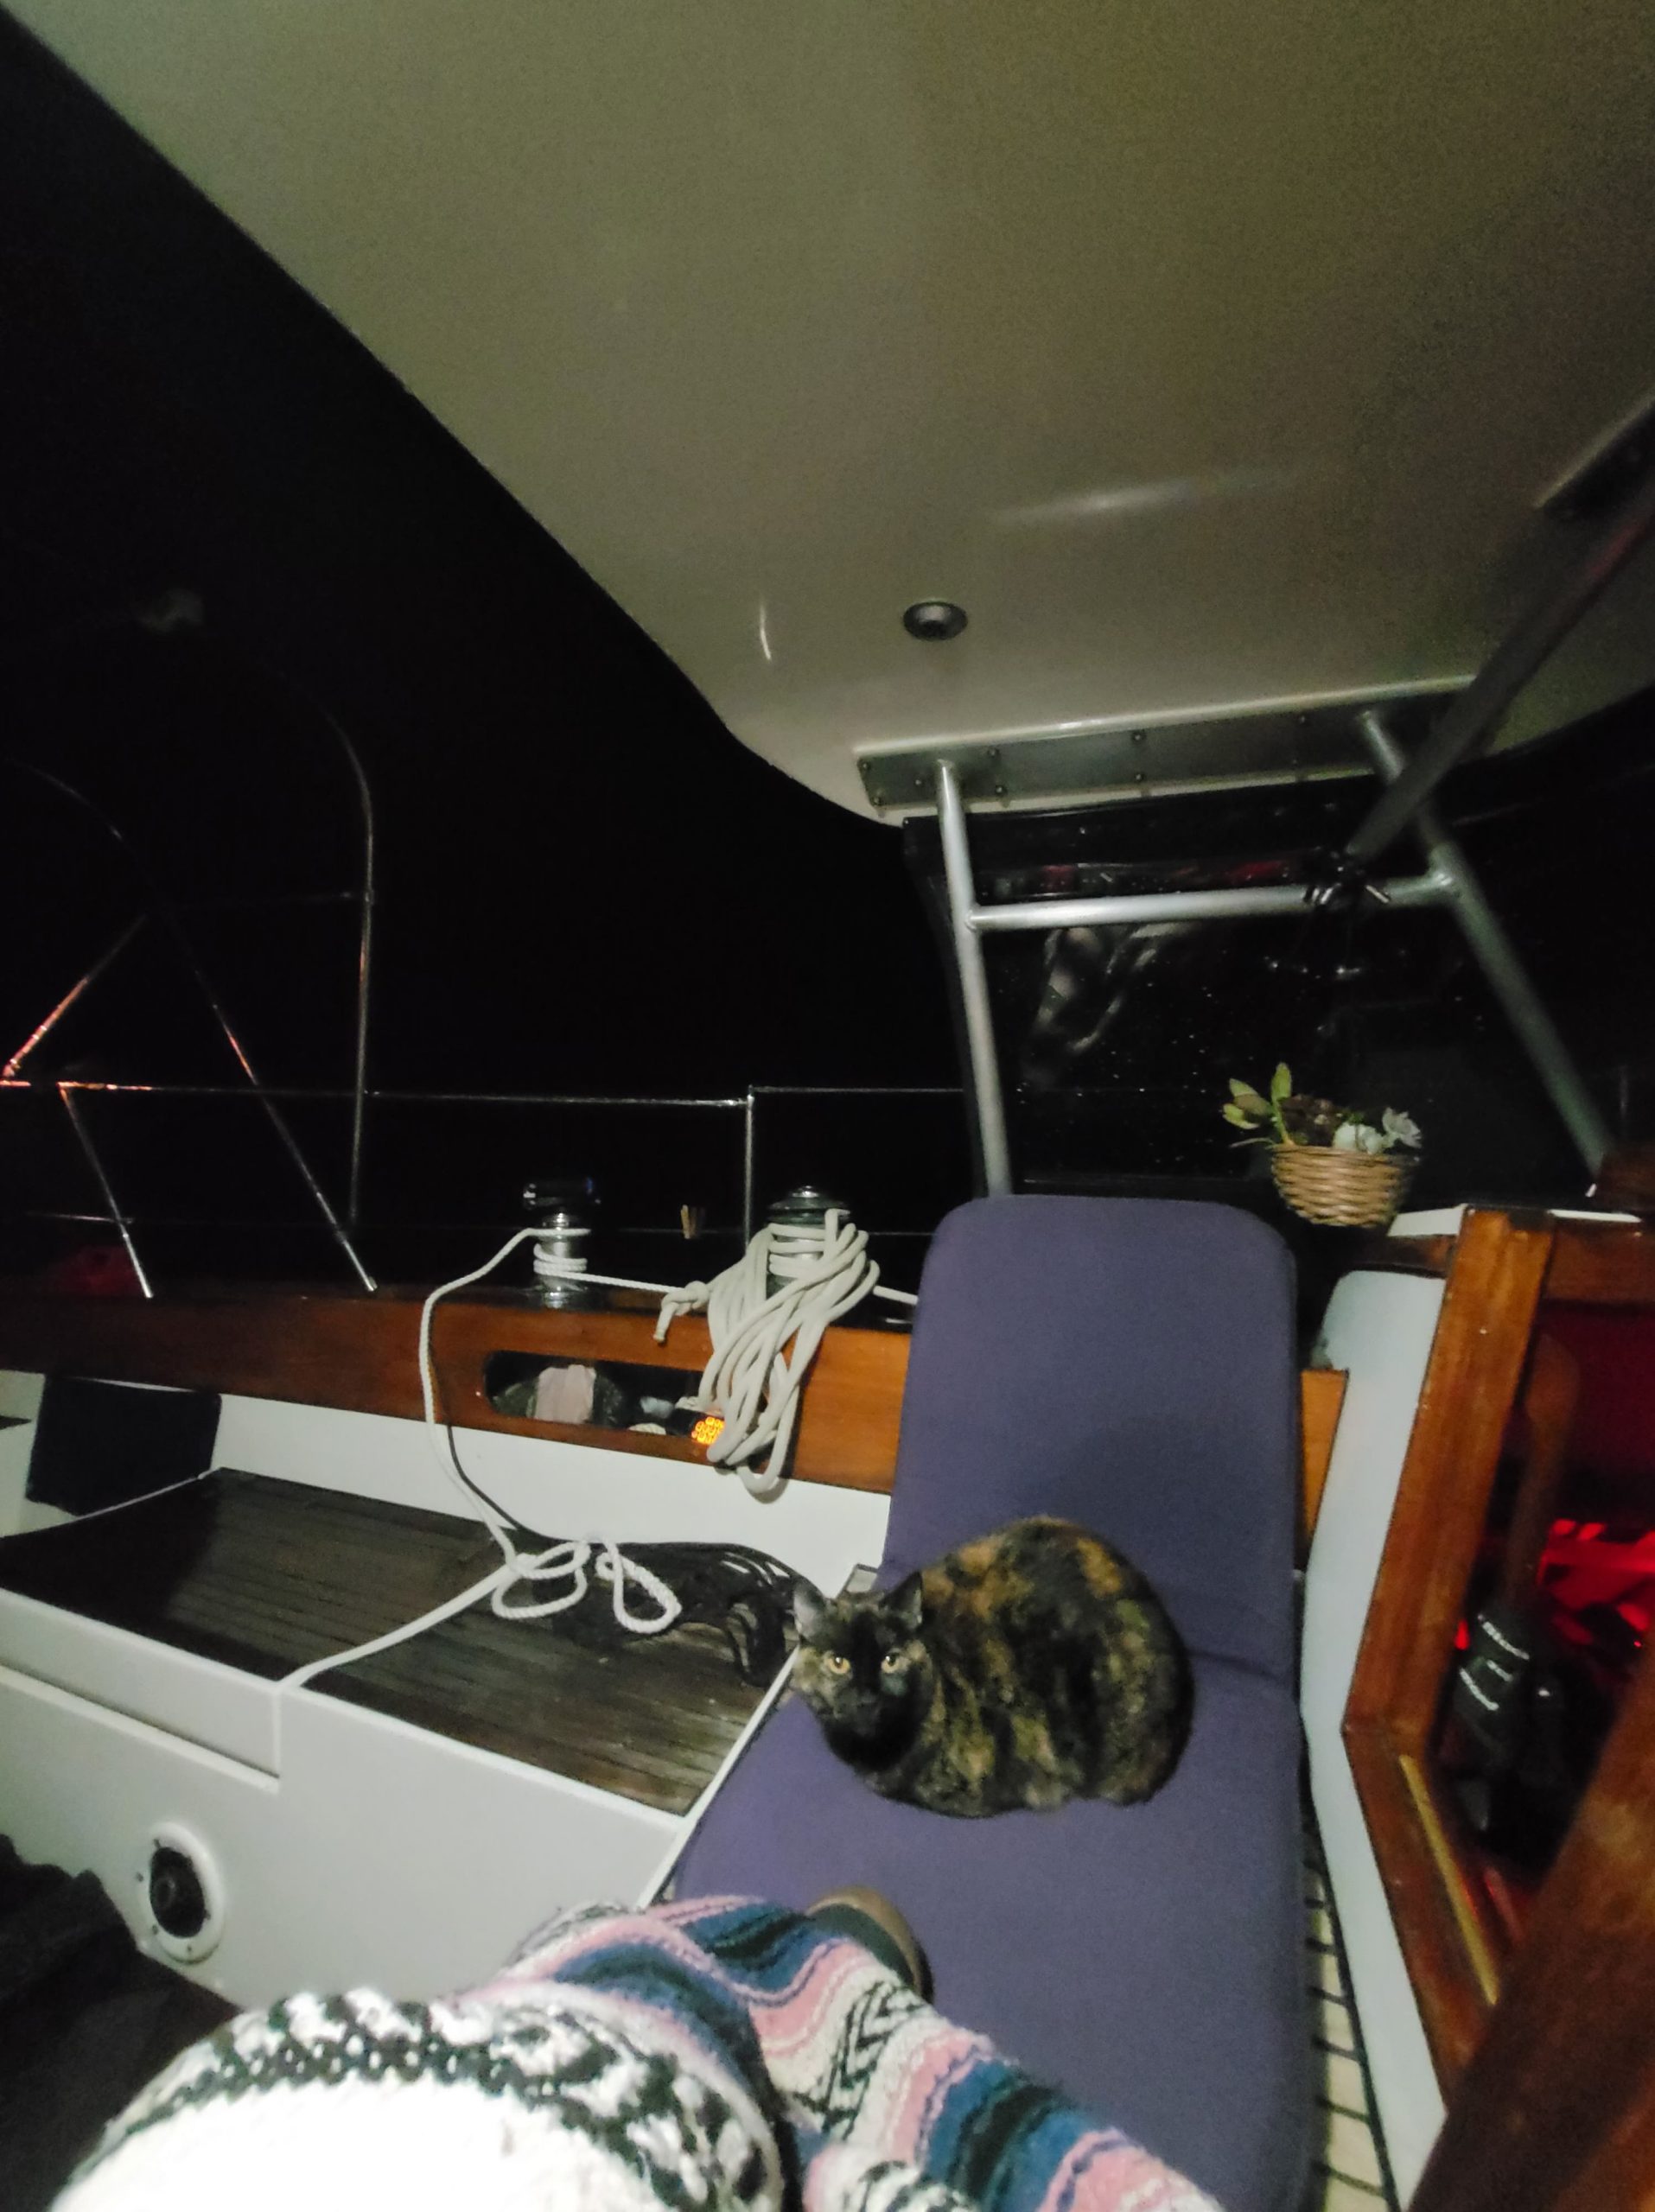 Cleo cat in the cockpit during a night passage